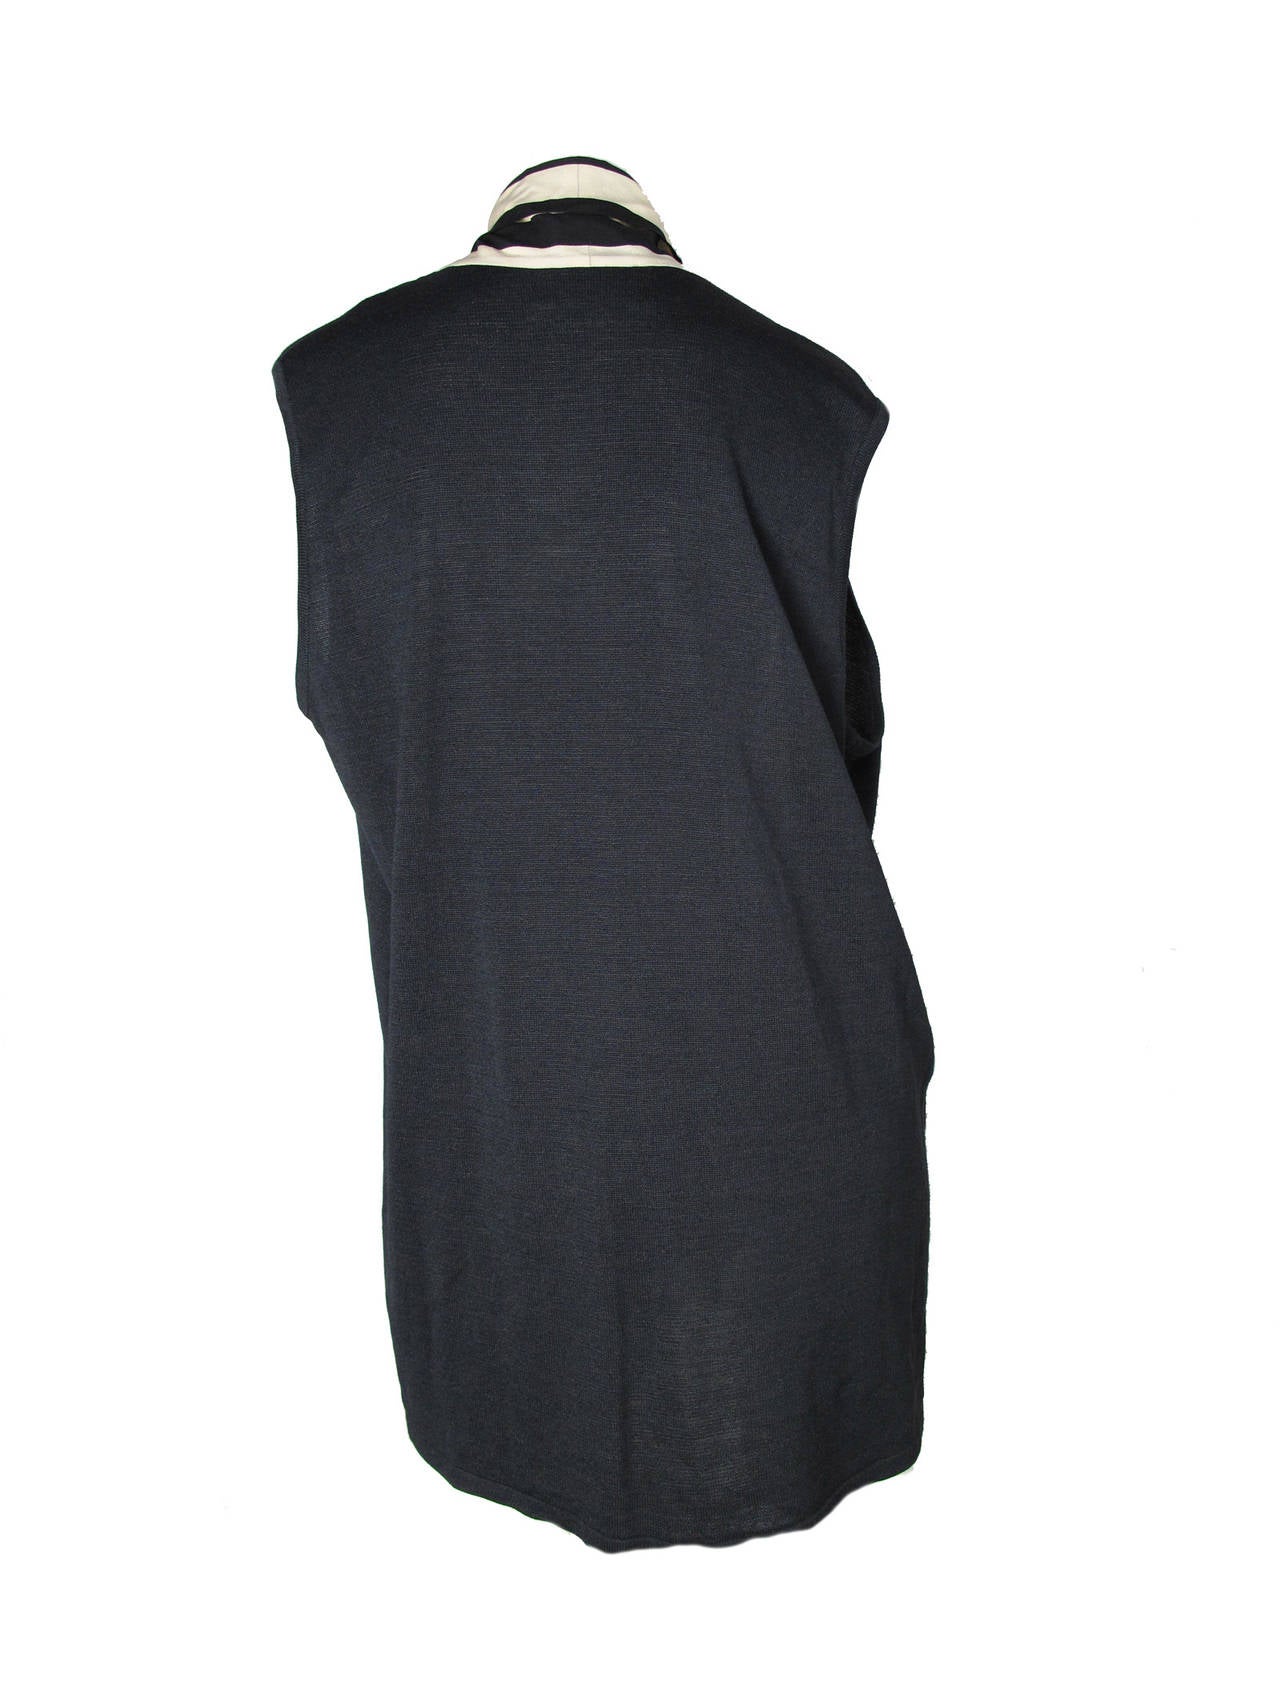 Gianfranco Ferre silk and striped sleeveless blouse with knit back.    Condition: Excellent. Size 42/ US 8